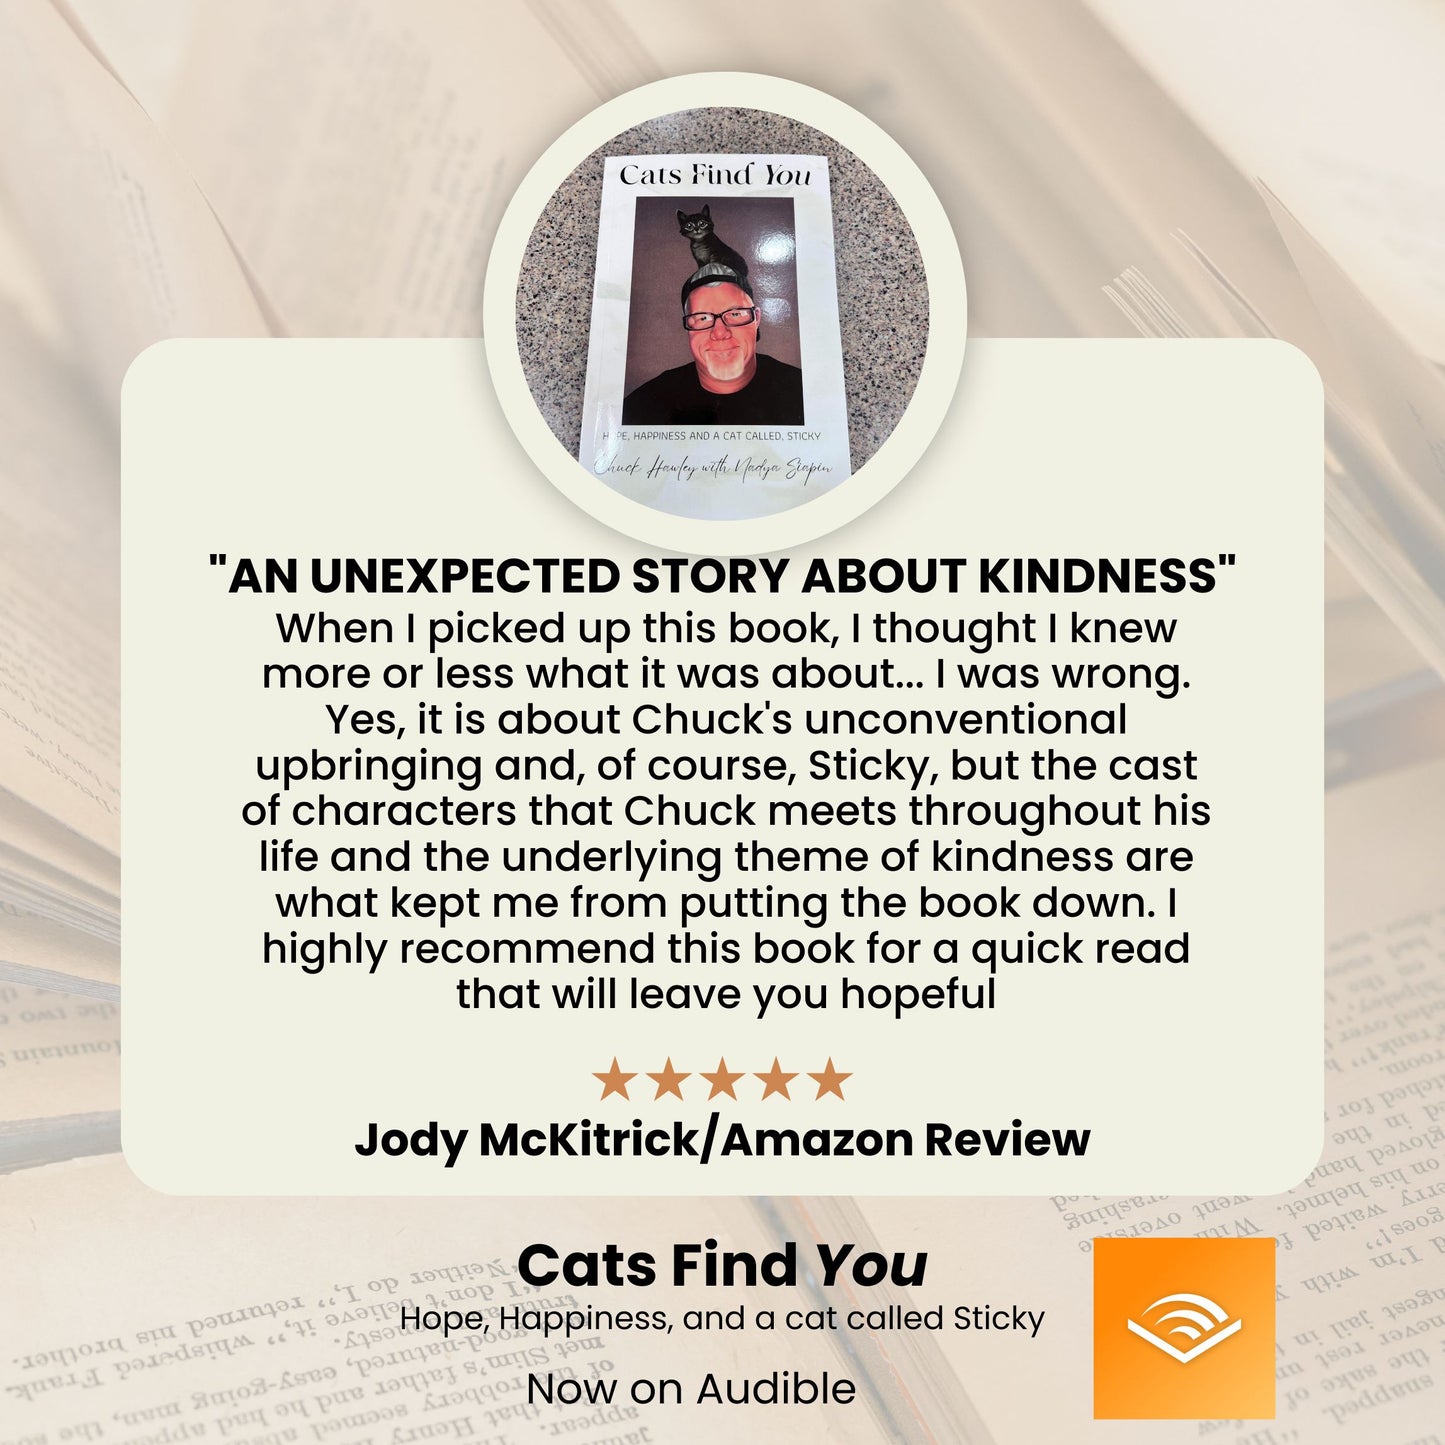 Cats Find You - Hope, Happiness and a cat called Sticky Paperback-Personalized and Autographed and shipped in a life size giant head envelope... for better or worse!:)